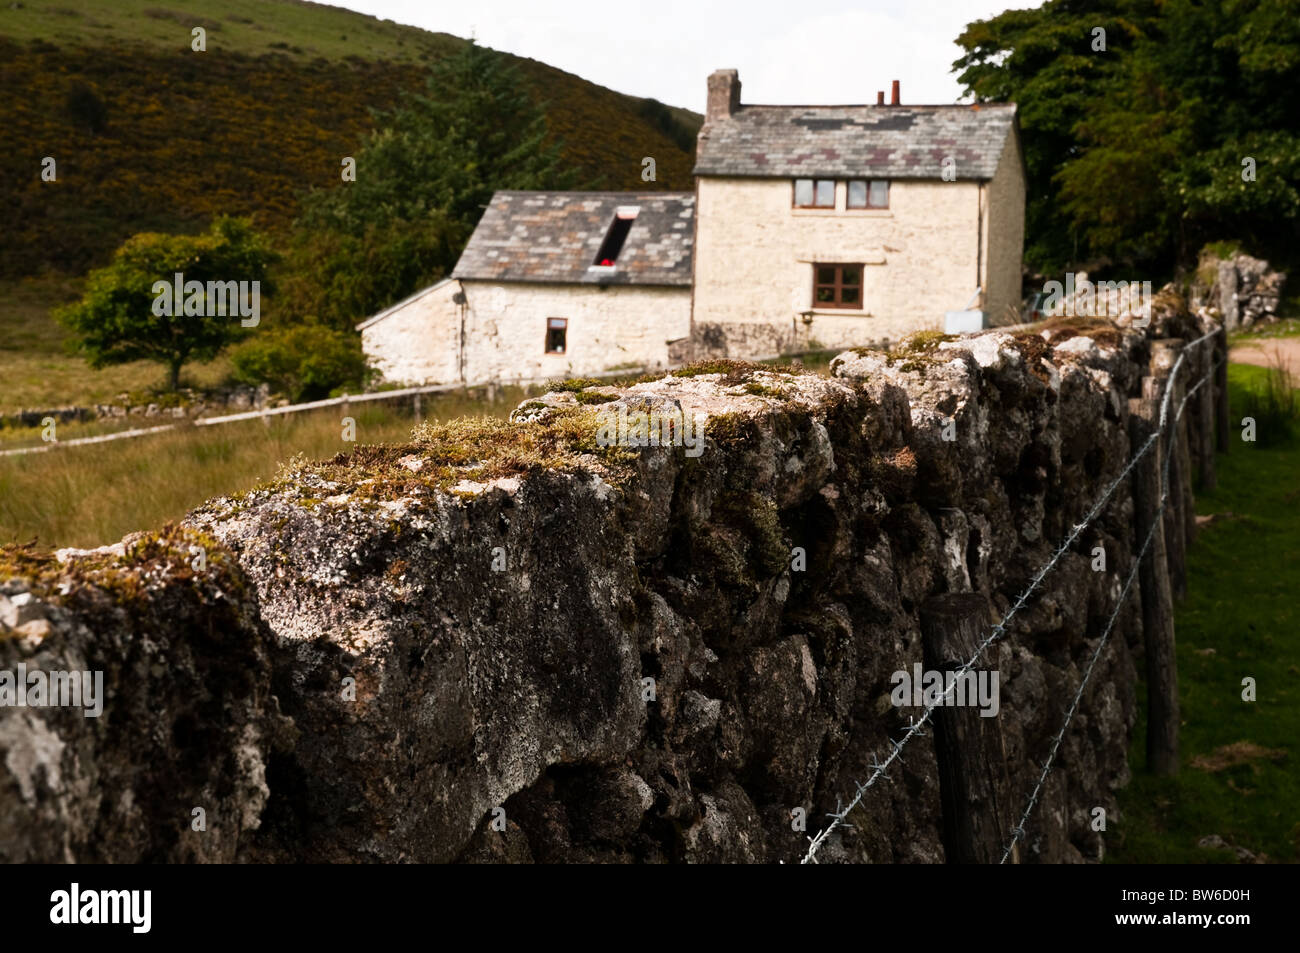 Old stone wall and house, Dartmoor Stock Photo